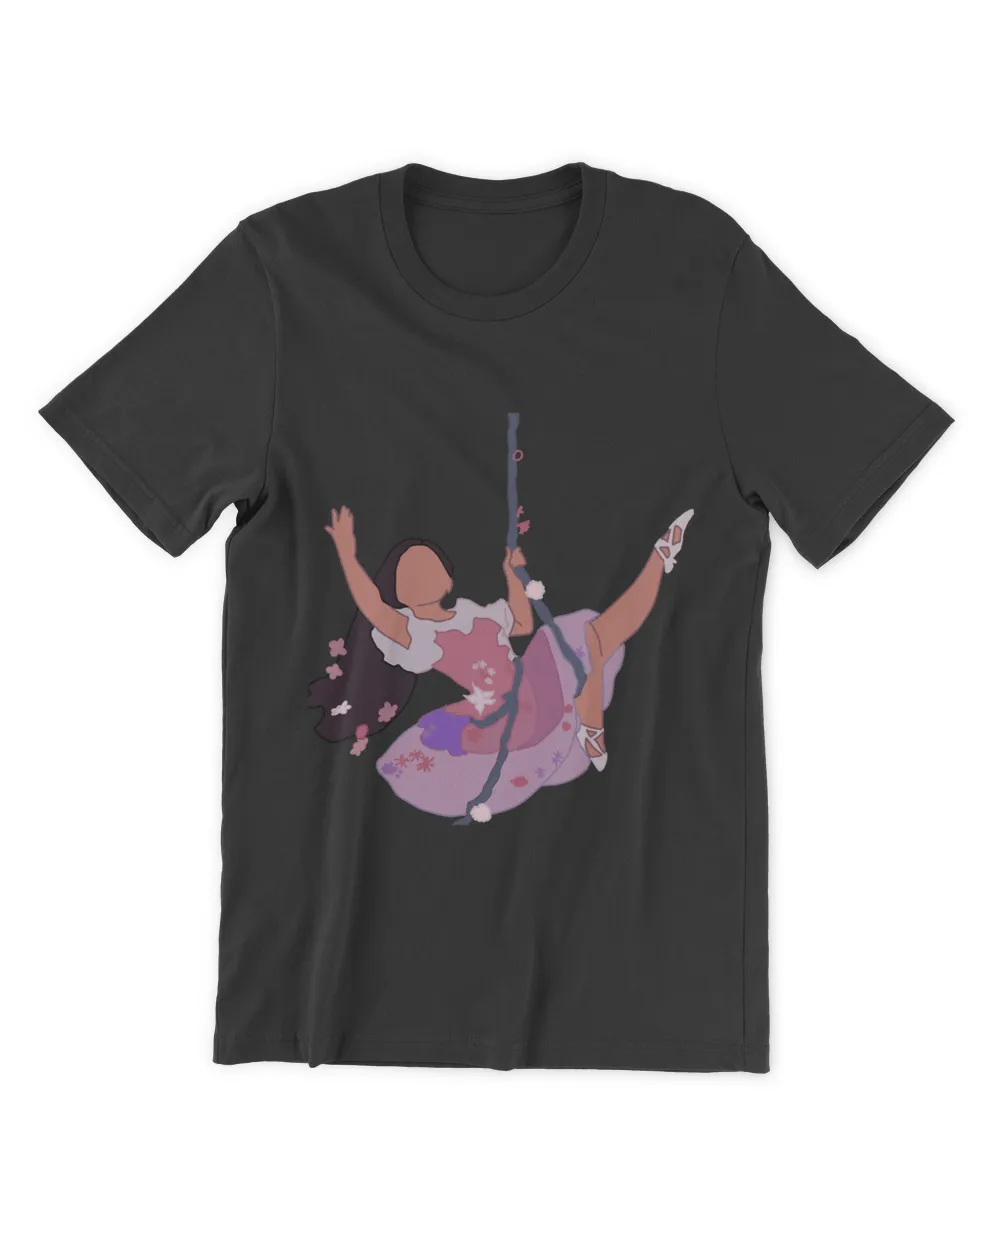 Isabela swinging from a vine  Classic T-Shirt